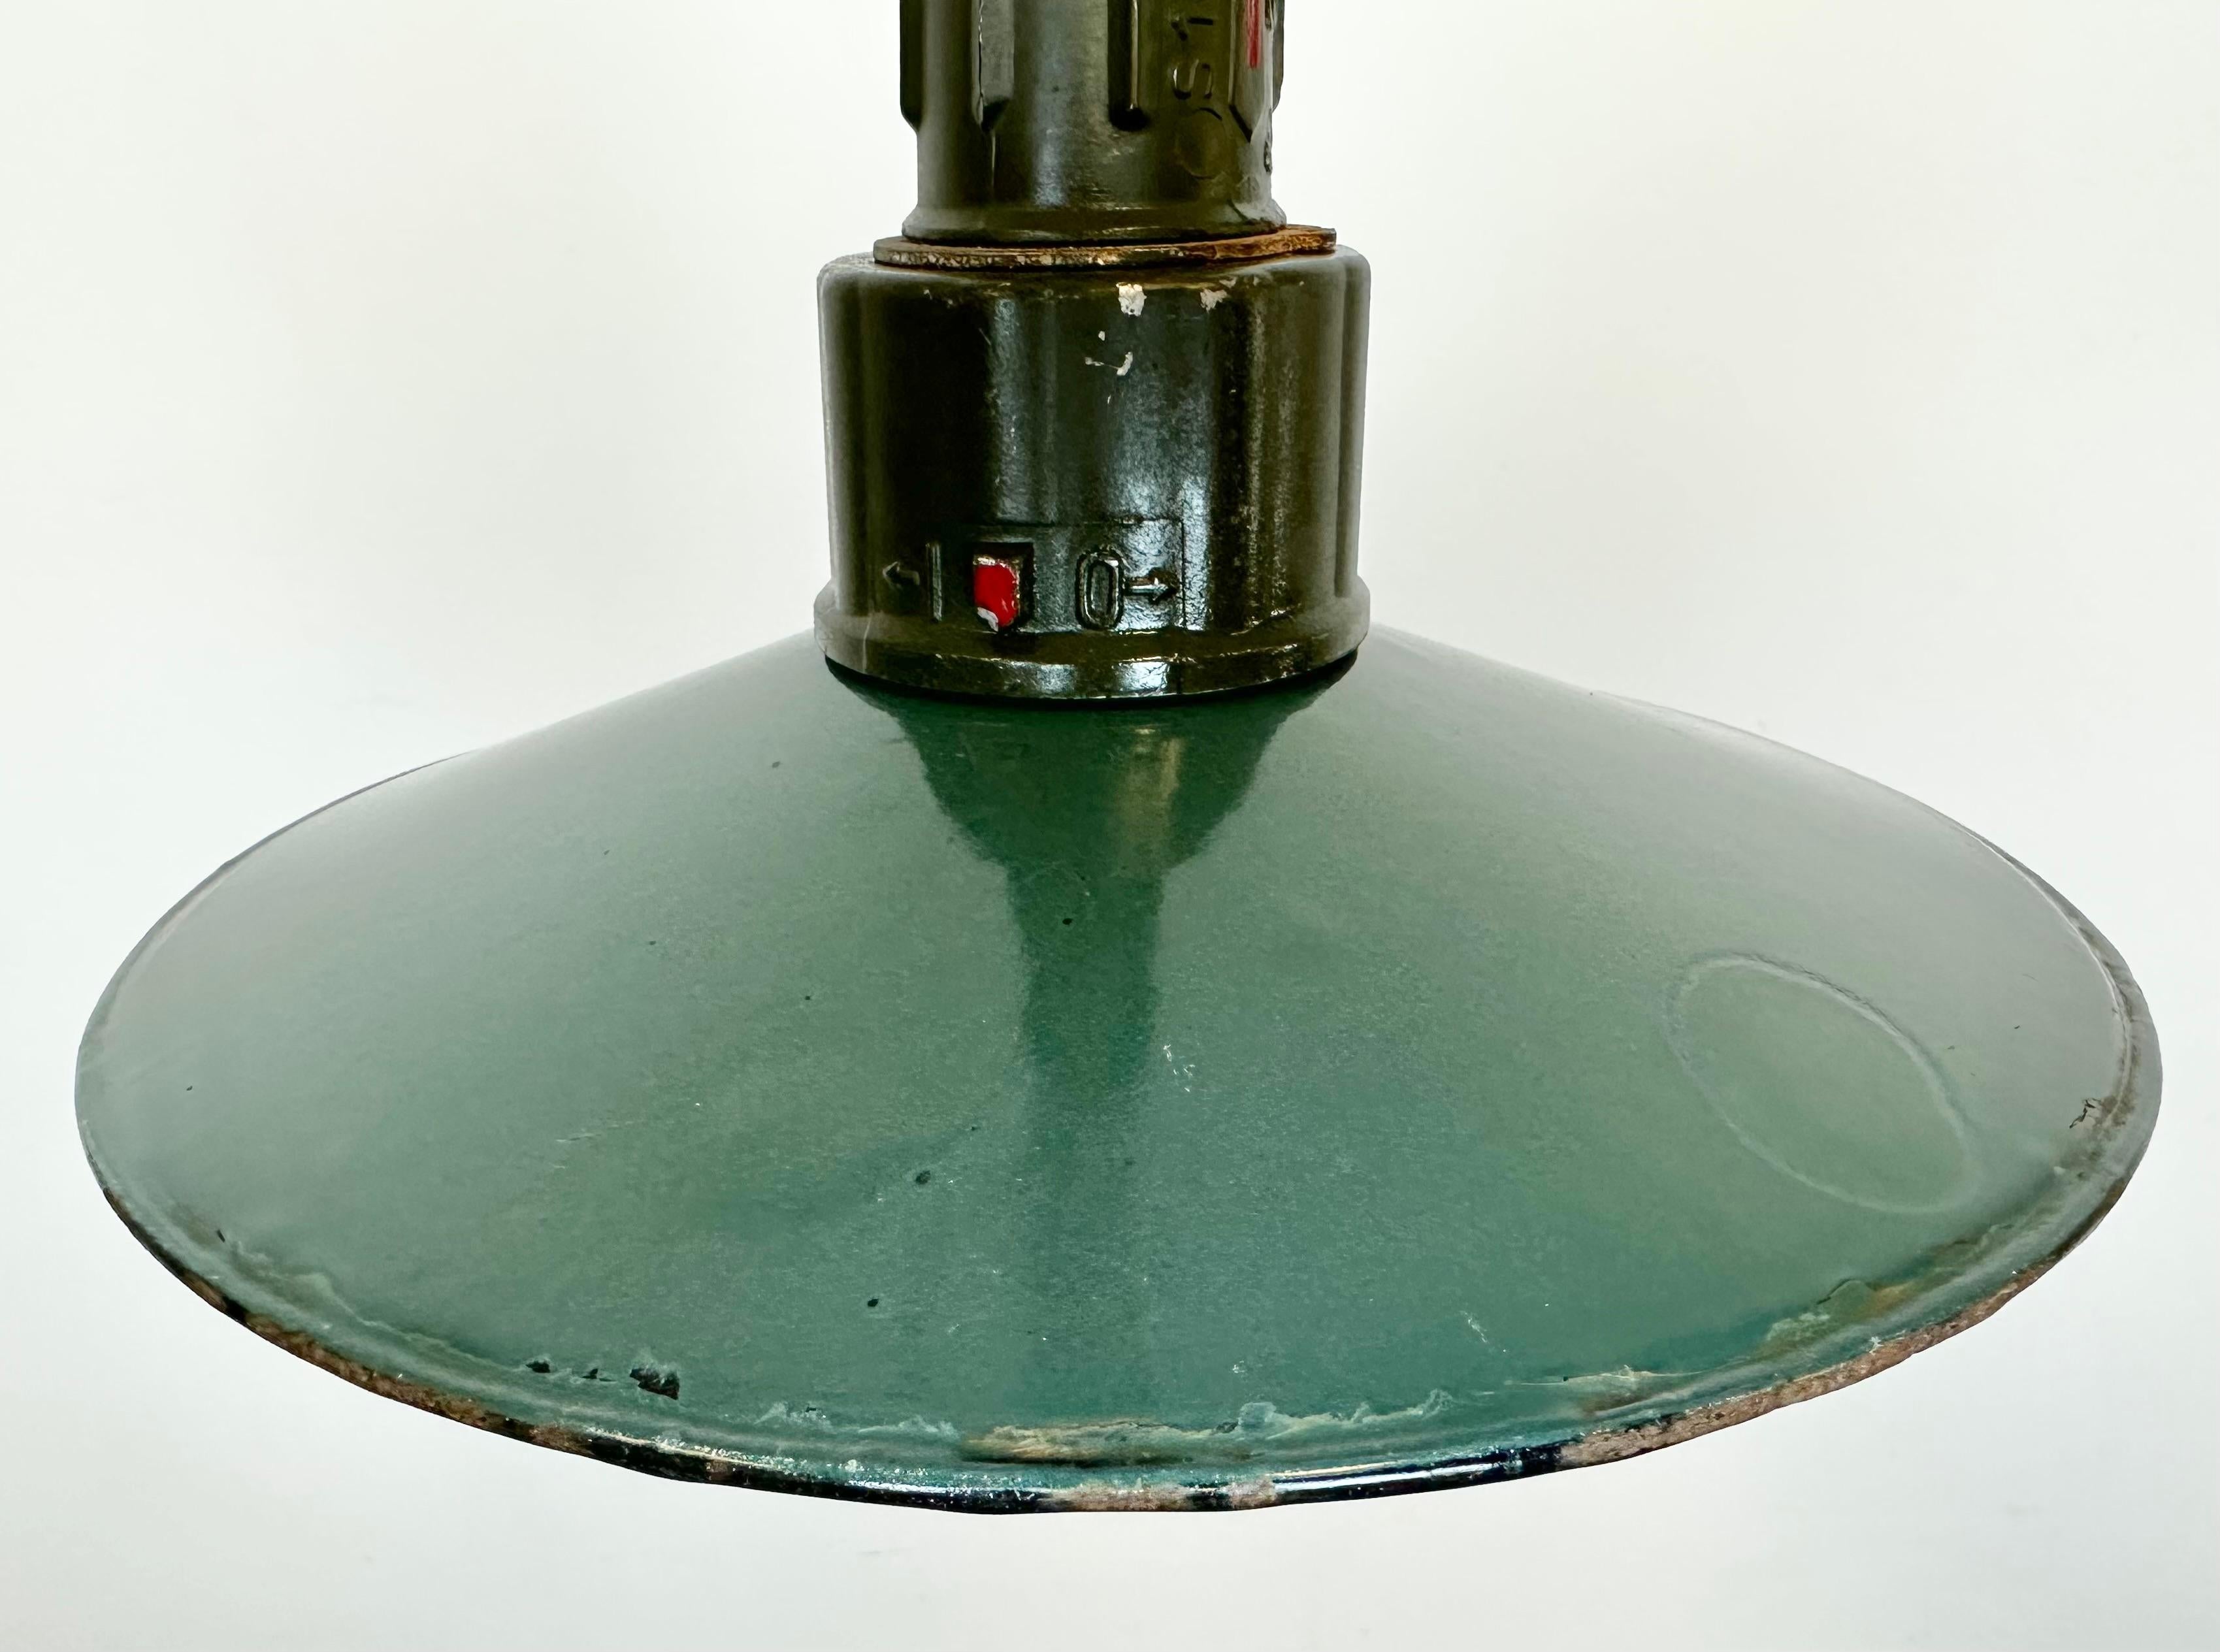 Industrial Petrol Enamel Military Pendant Lamp with Cast Aluminium Top, 1960s In Good Condition For Sale In Kojetice, CZ